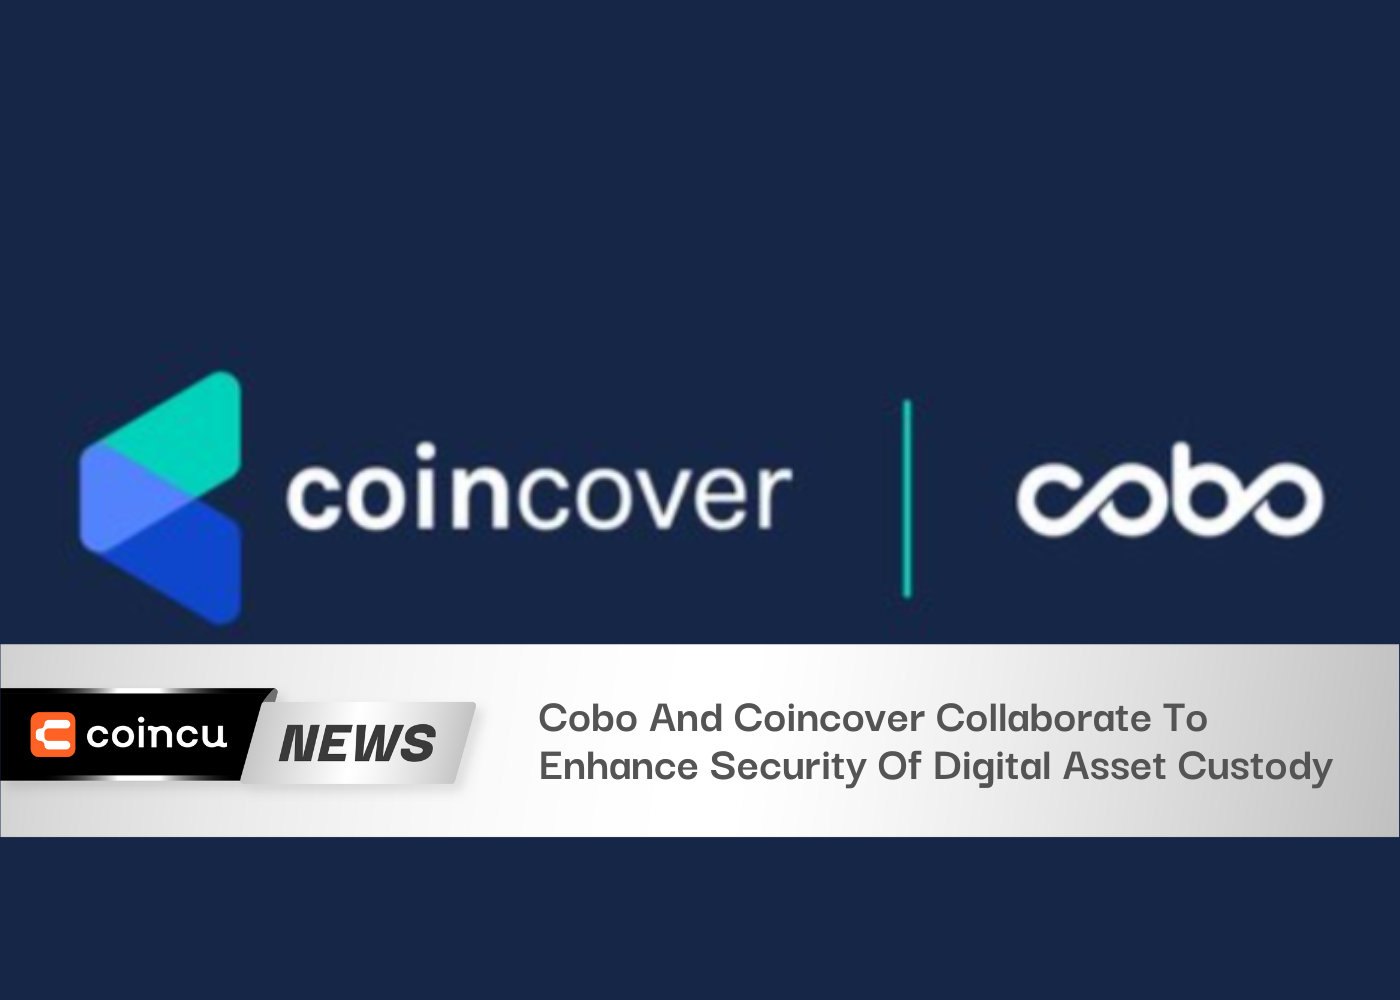 Cobo And Coincover Collaborate To Enhance Security Of Digital Asset Custody